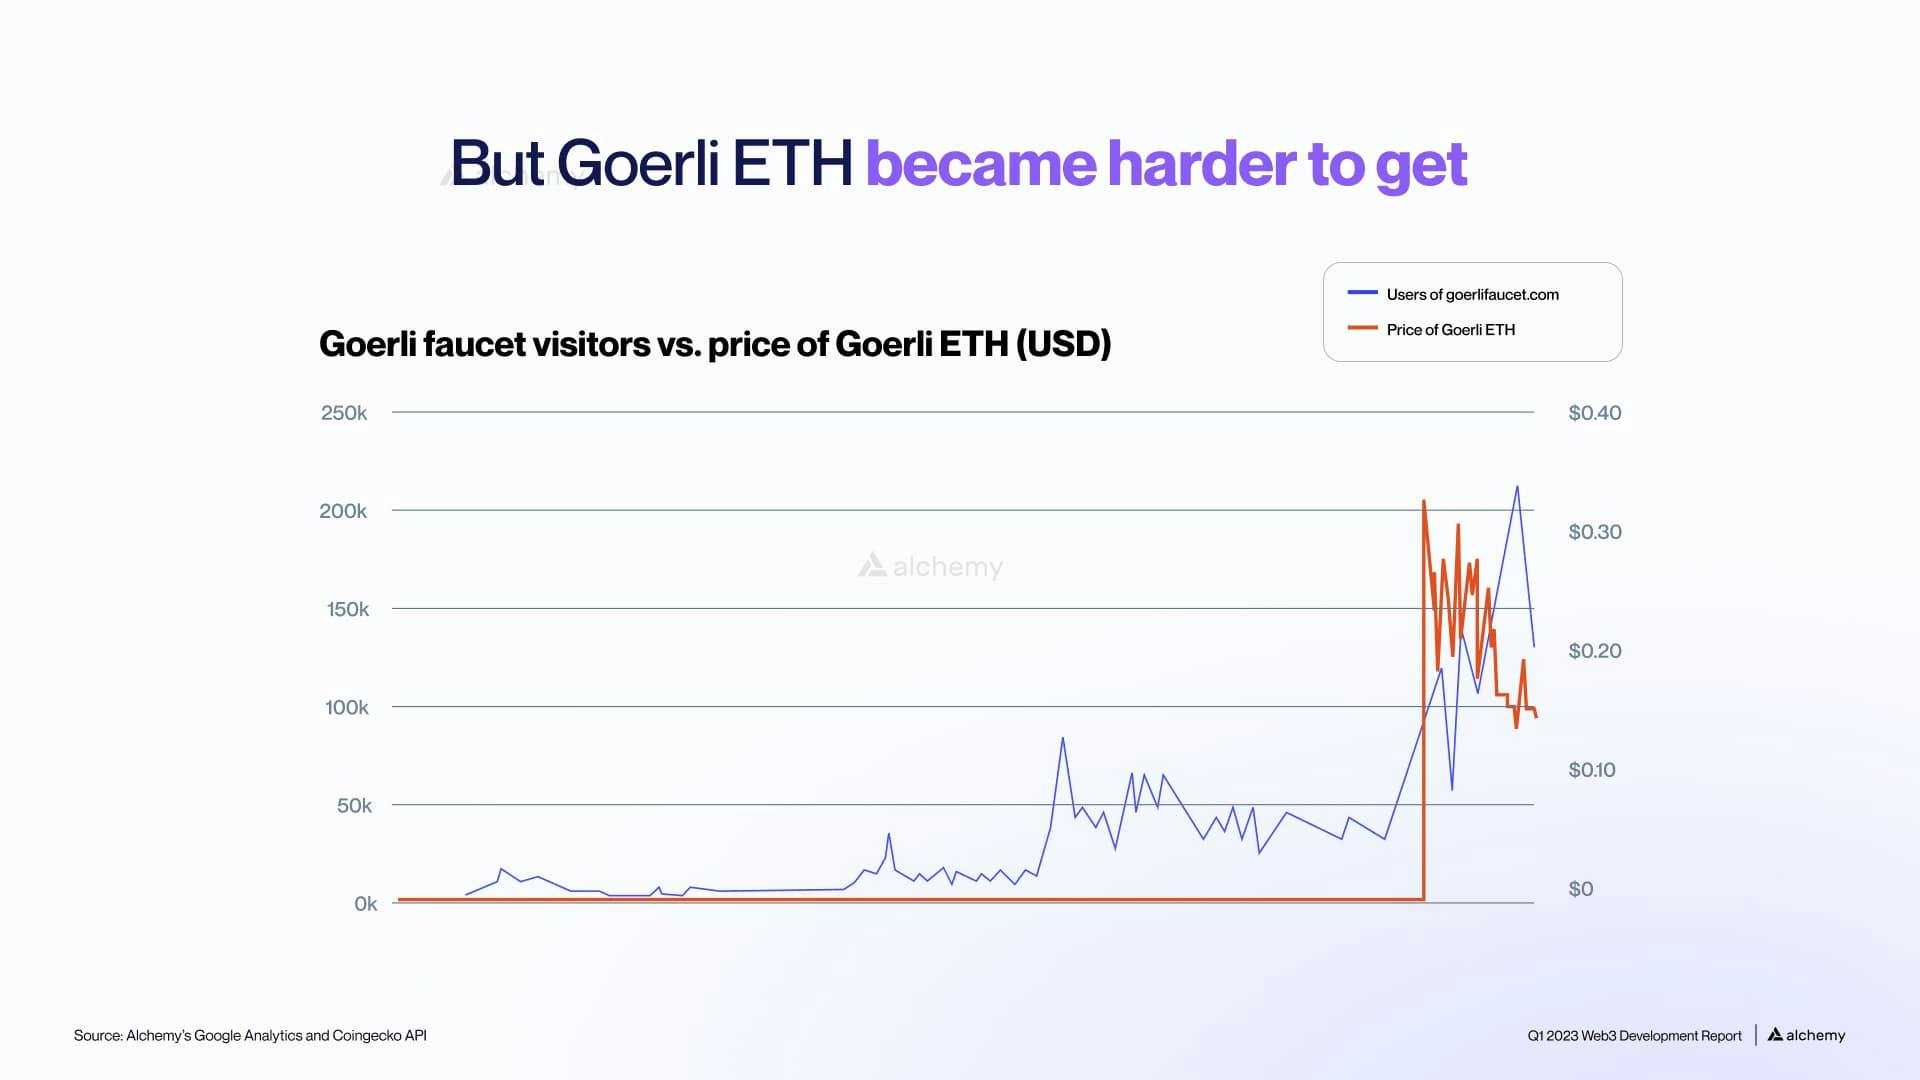 Goerli faucet visitors compared to the price of Goerli ETH over time